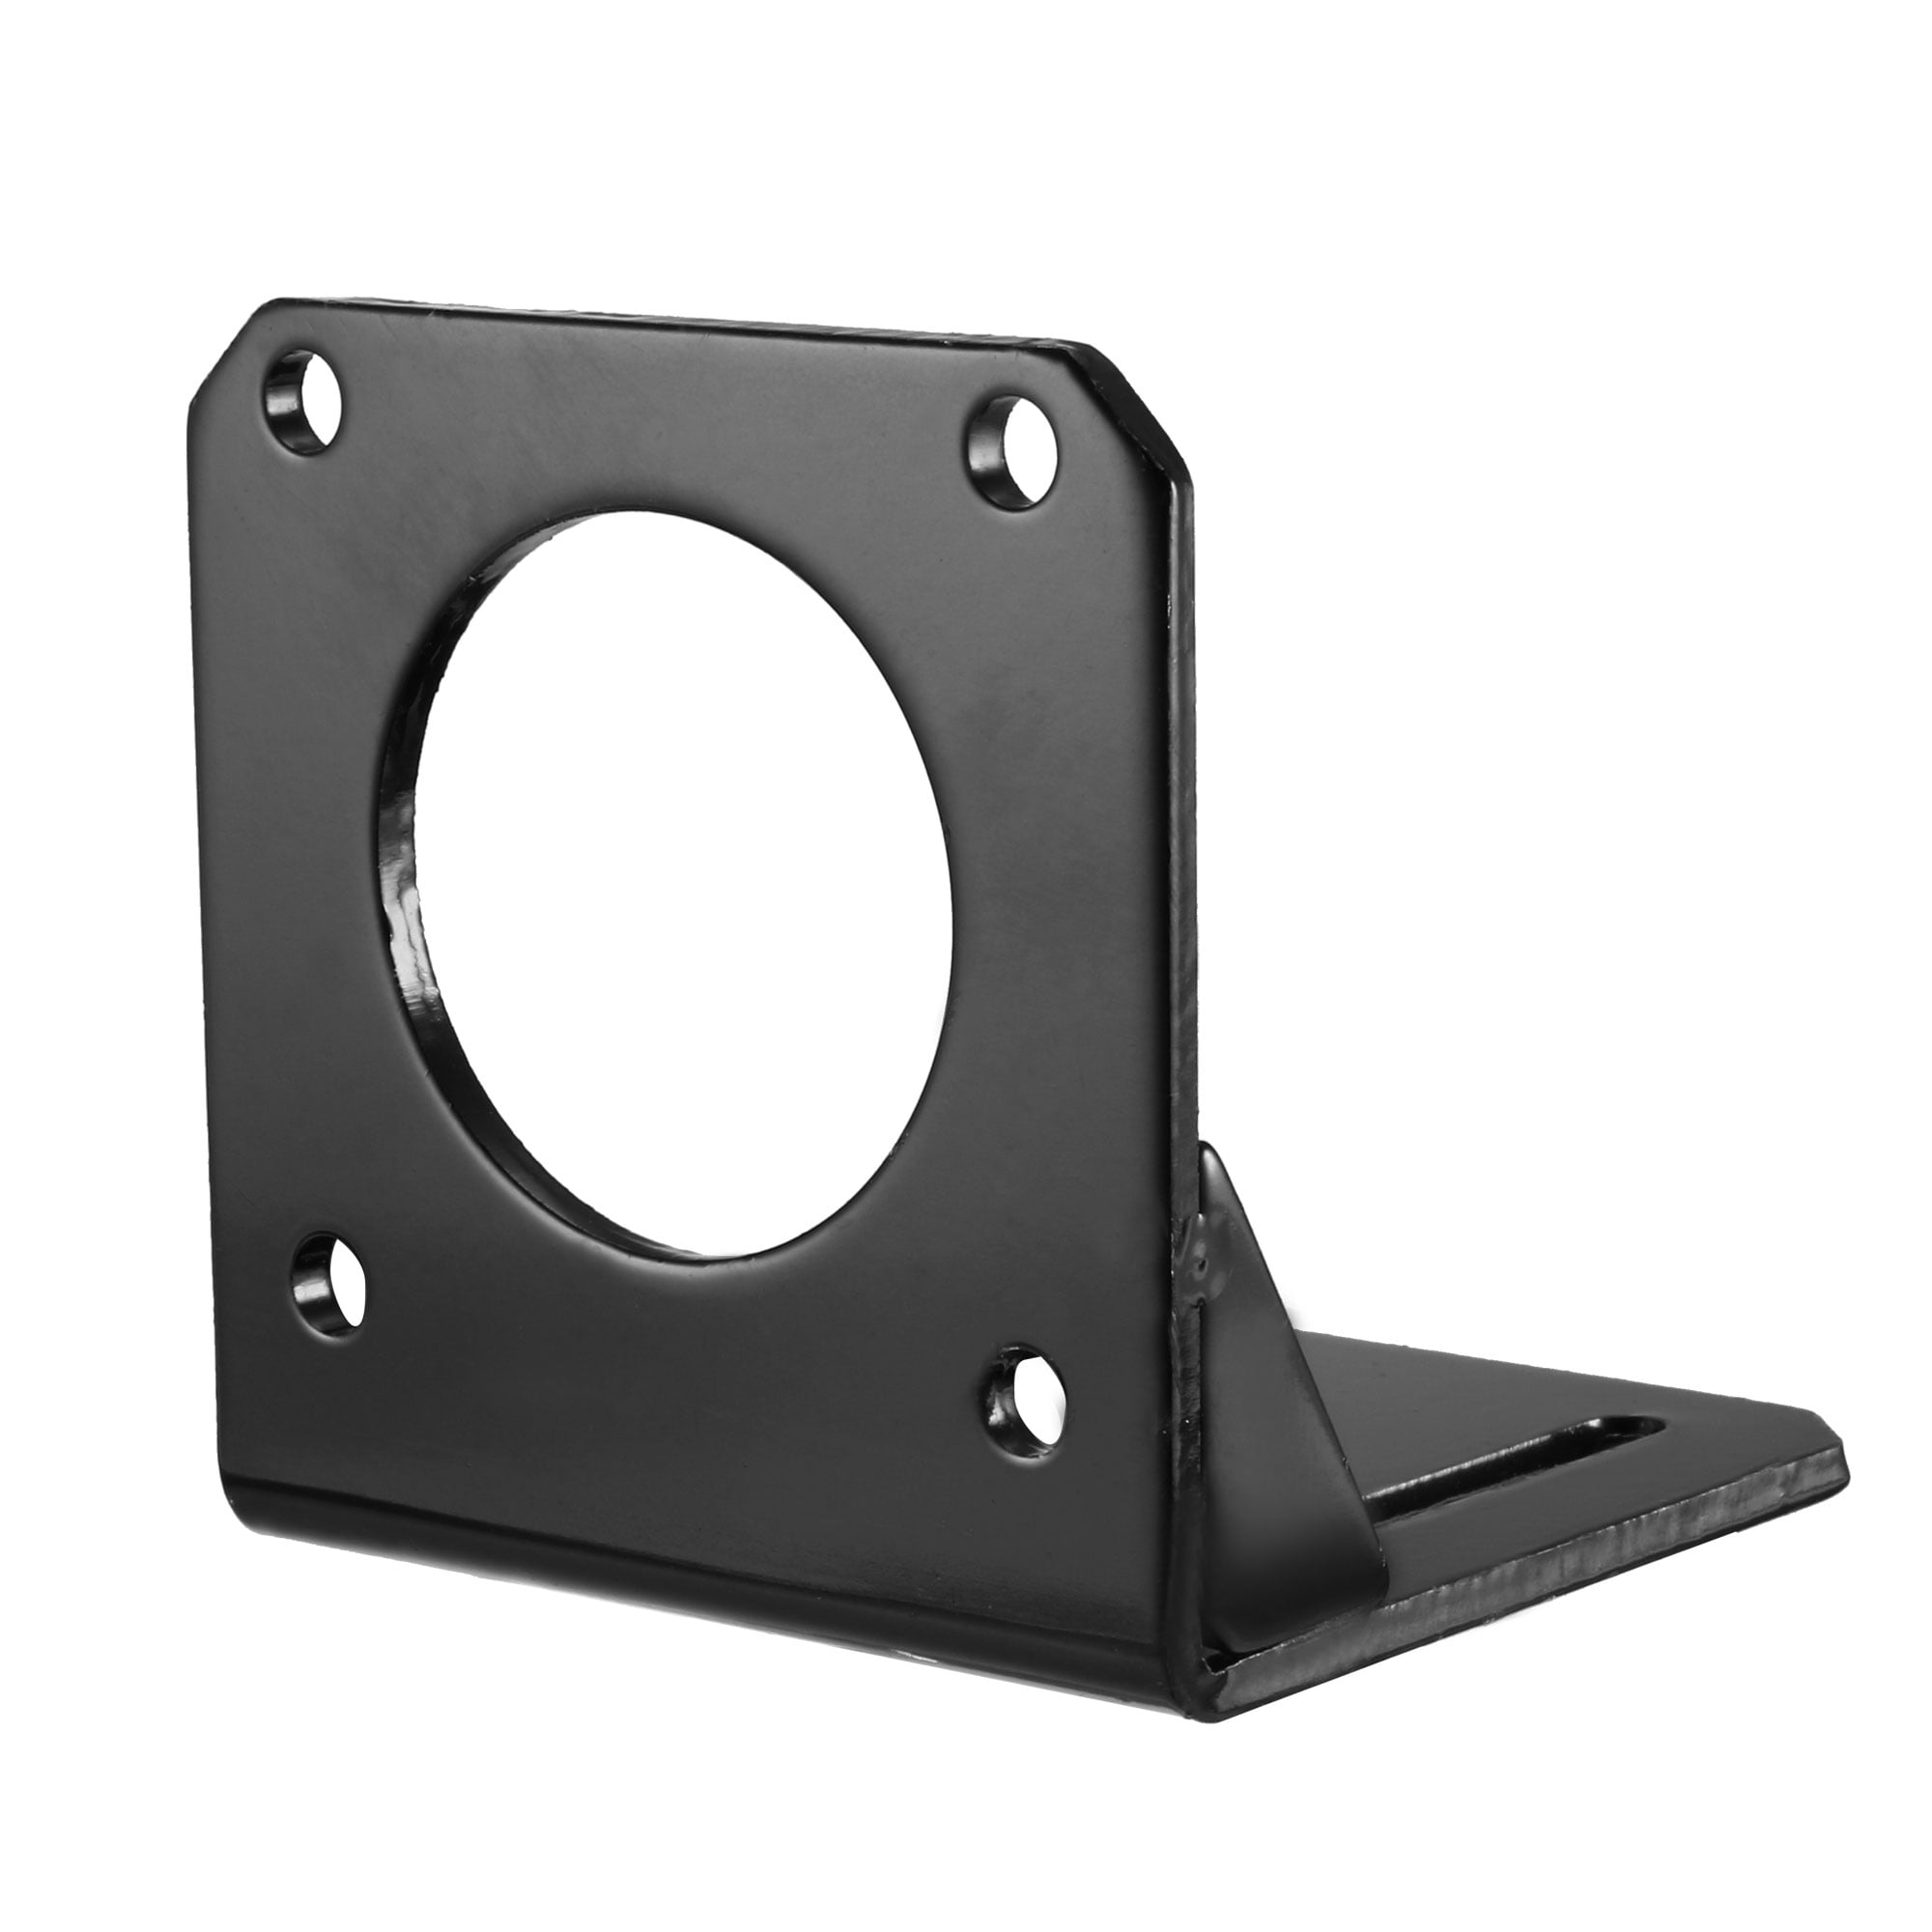 Details about   2X L-Shaped Mounting Bracket Alloy Steel Holder Fixed Seat for 57 Stepper Motor 